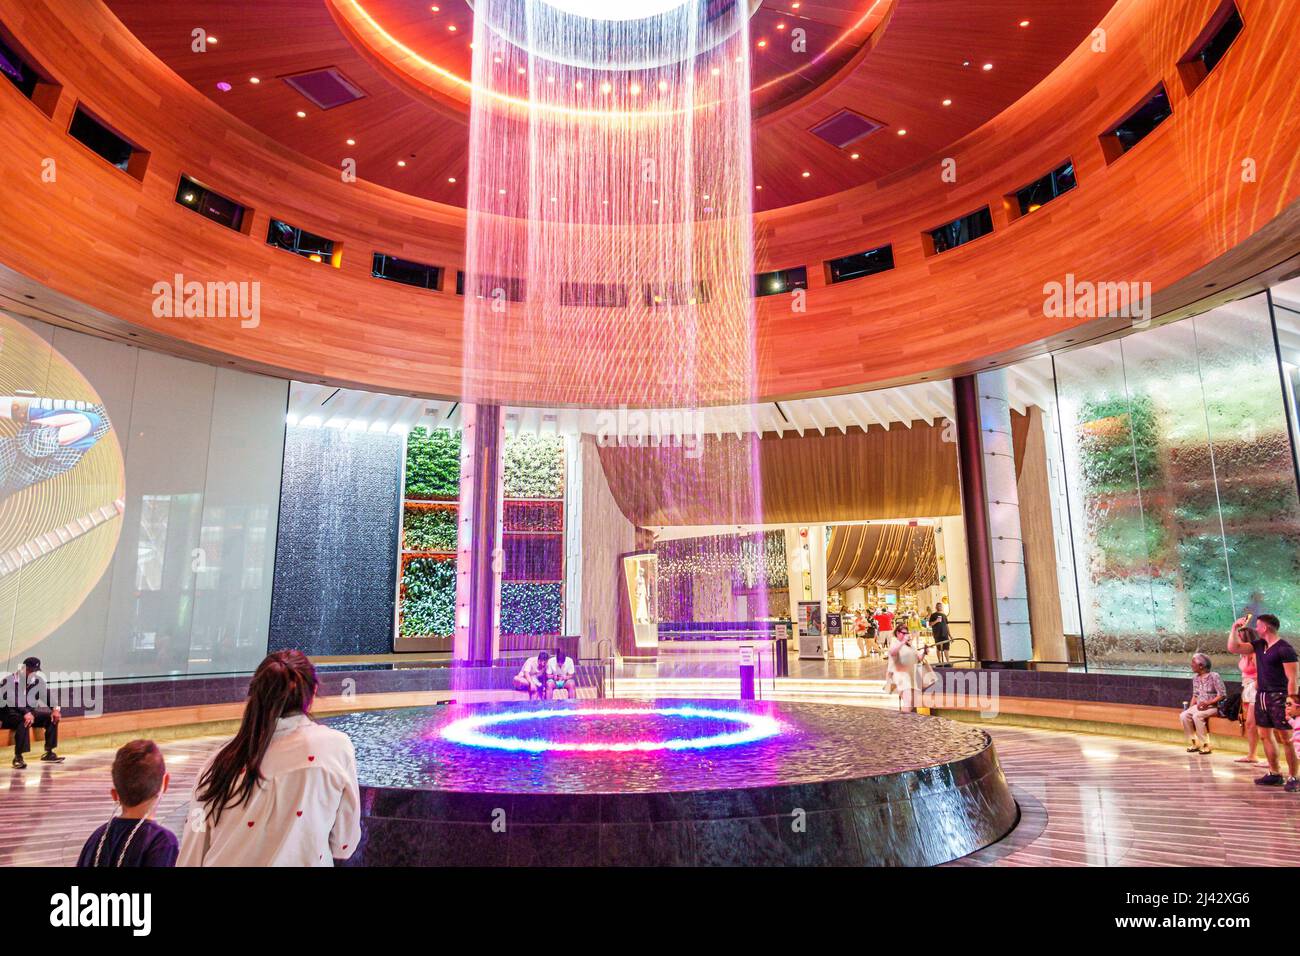 Hollywood Florida Seminole Hard Rock Hotel & Casino tribe tribal reservation inside interior The Oculus waterfall circular water fountain light show l Stock Photo